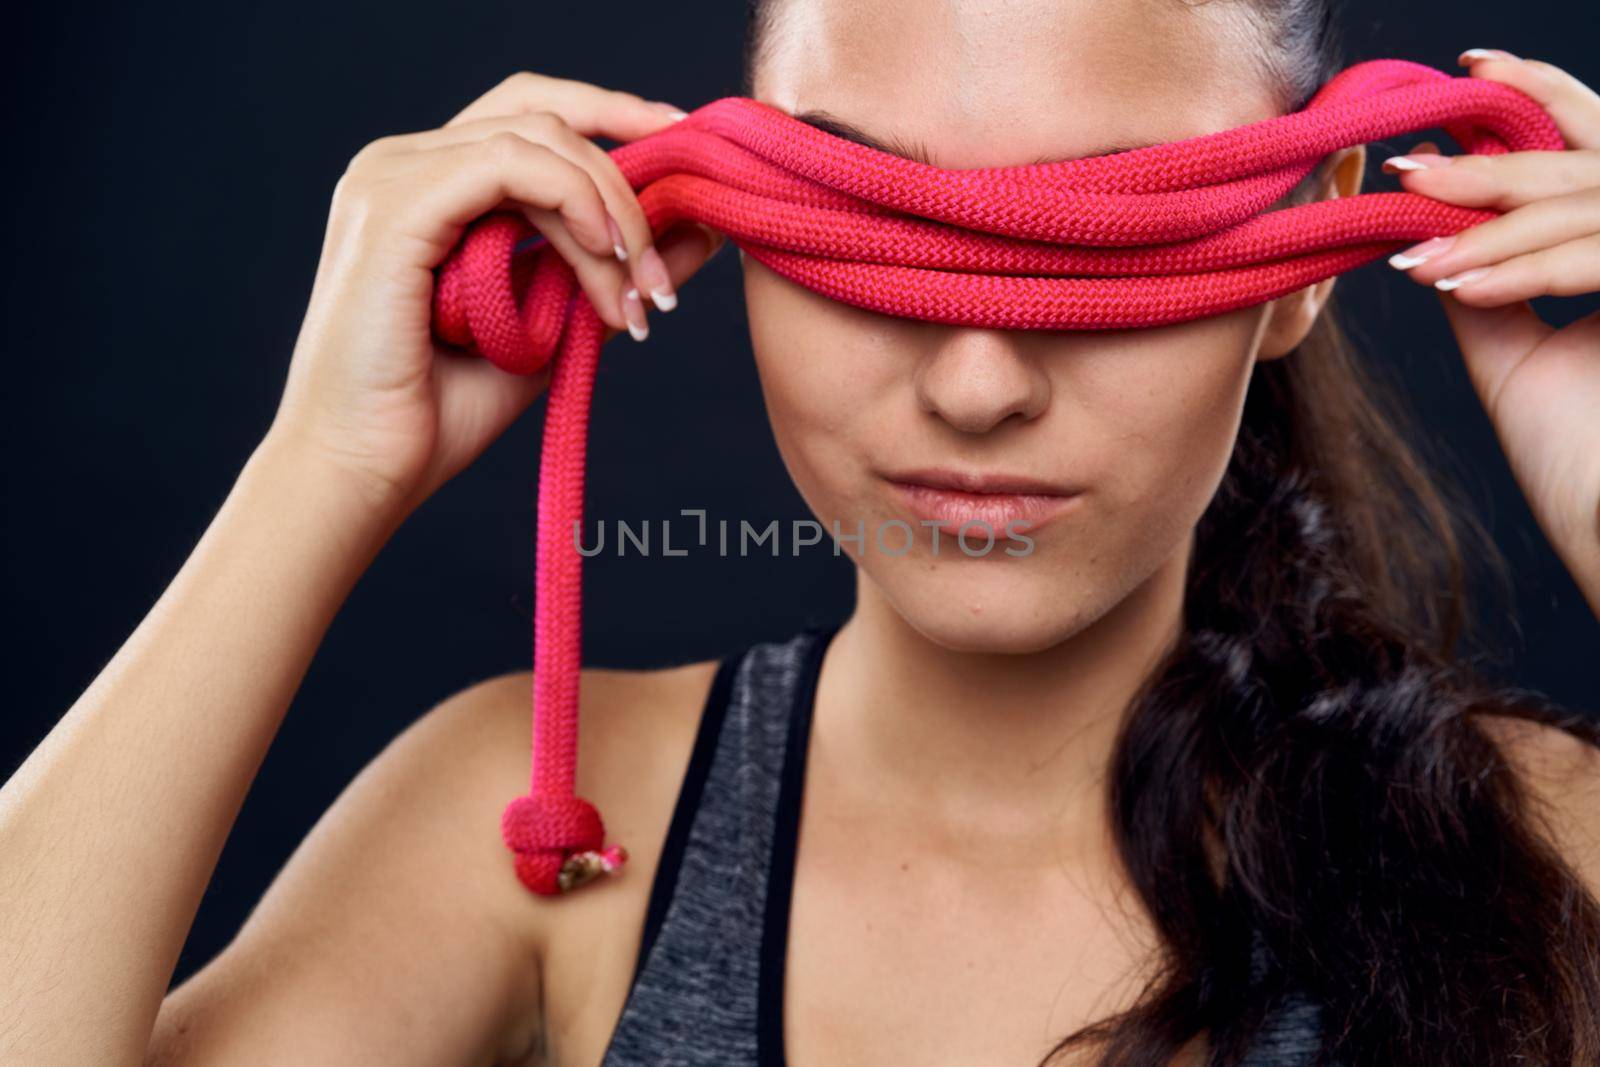 woman athlete fitness workout exercise close-up black background by Vichizh